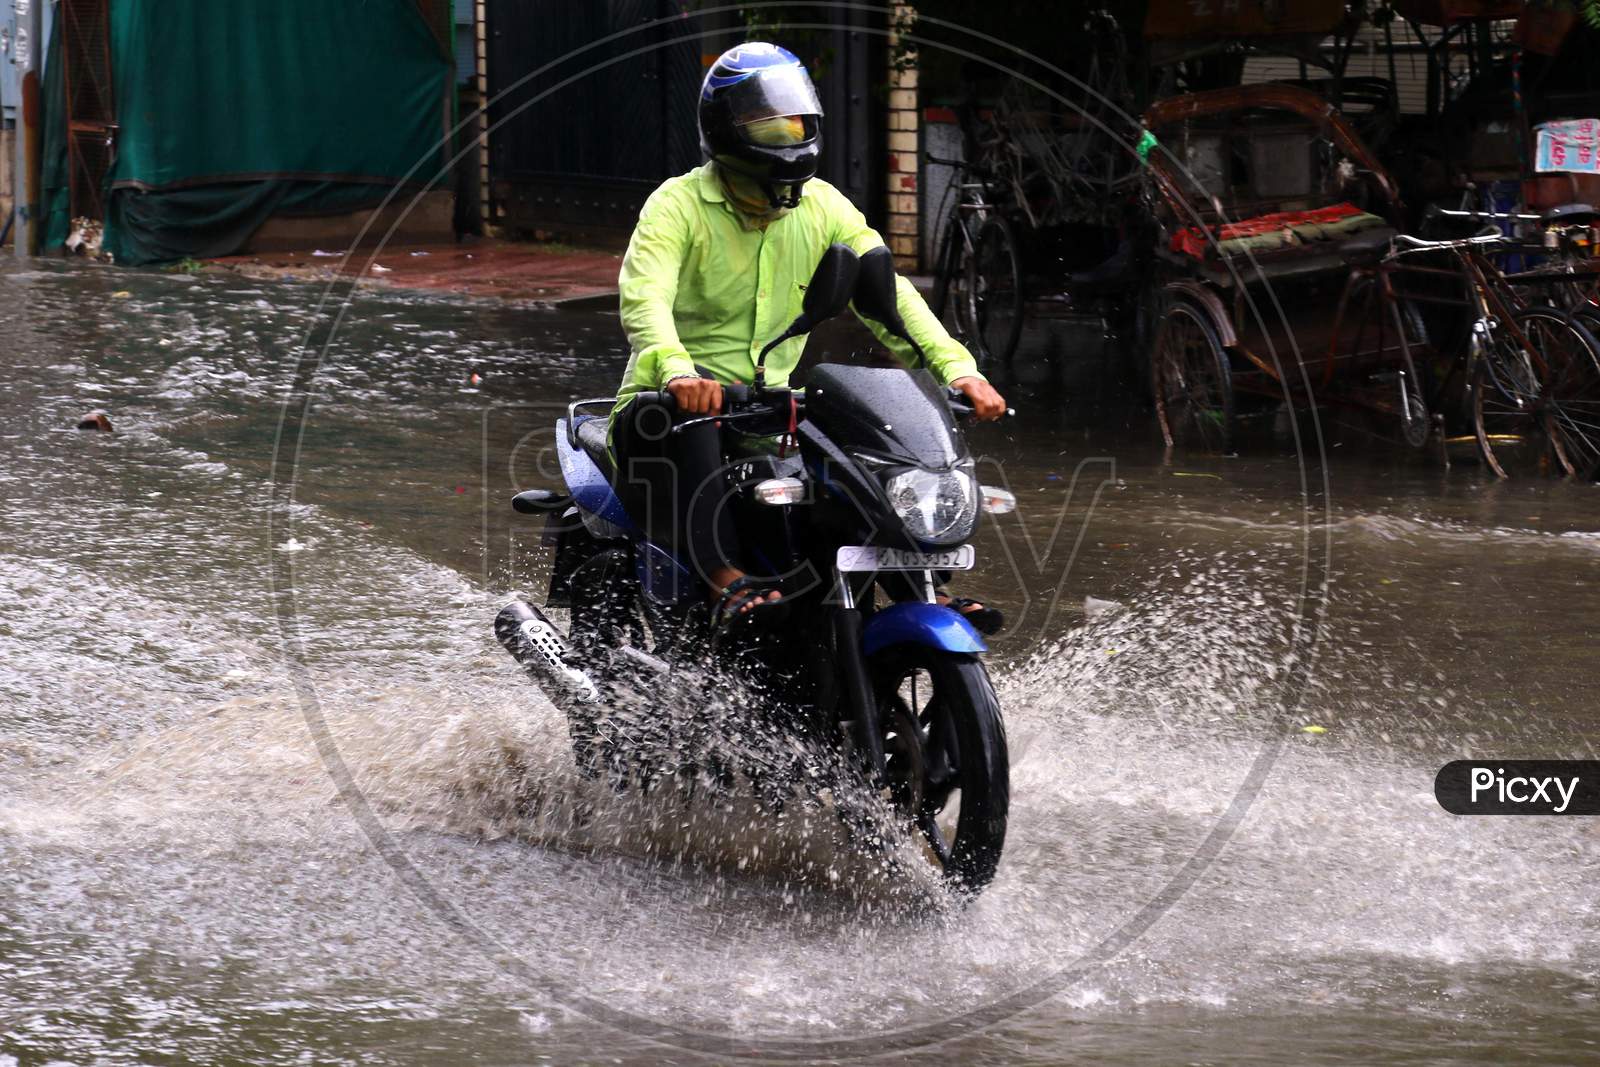 A Bike Rider  On A Waterlogged Road During Rain, In Ajmer, Rajasthan, India On 04 June 2020.